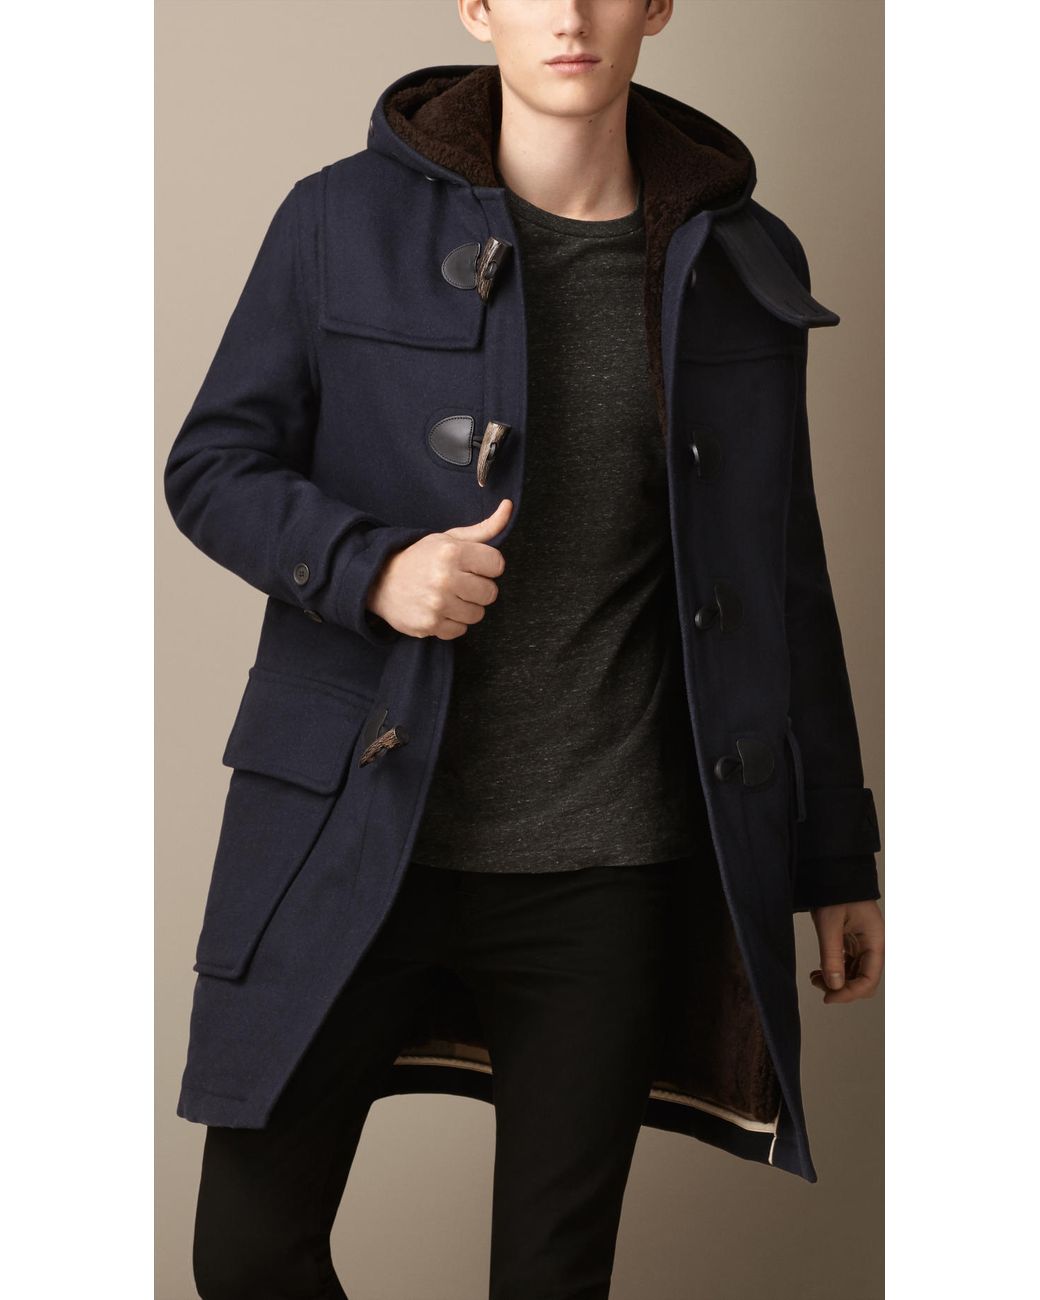 Burberry Double Faced Wool Duffle Coat with Shearling Lining in Navy ...